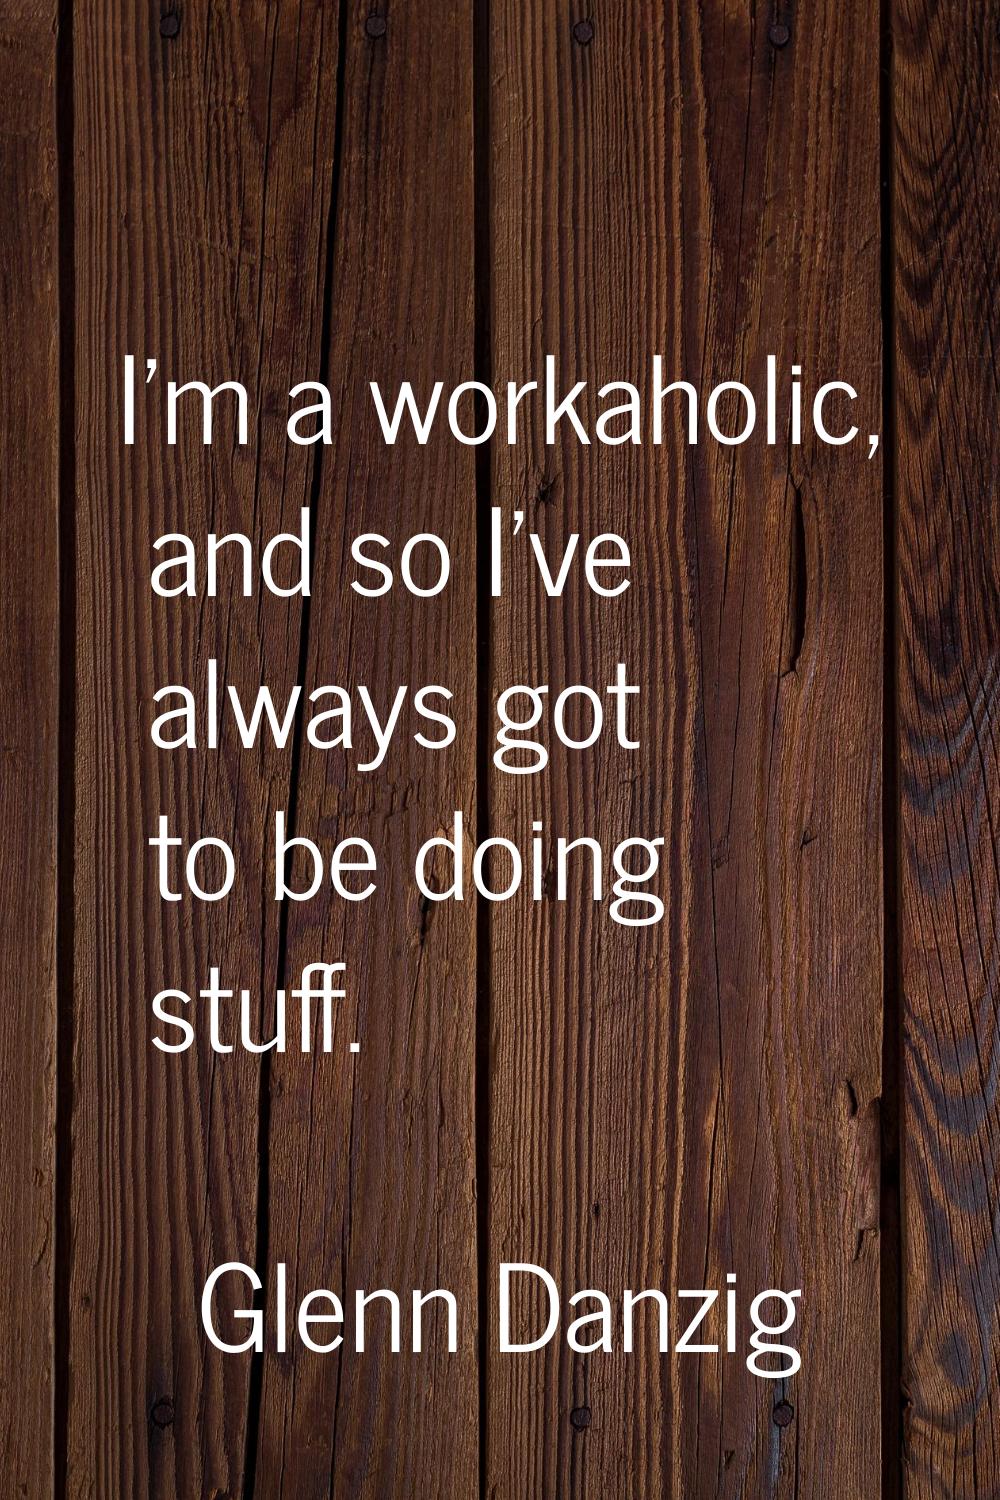 I'm a workaholic, and so I've always got to be doing stuff.